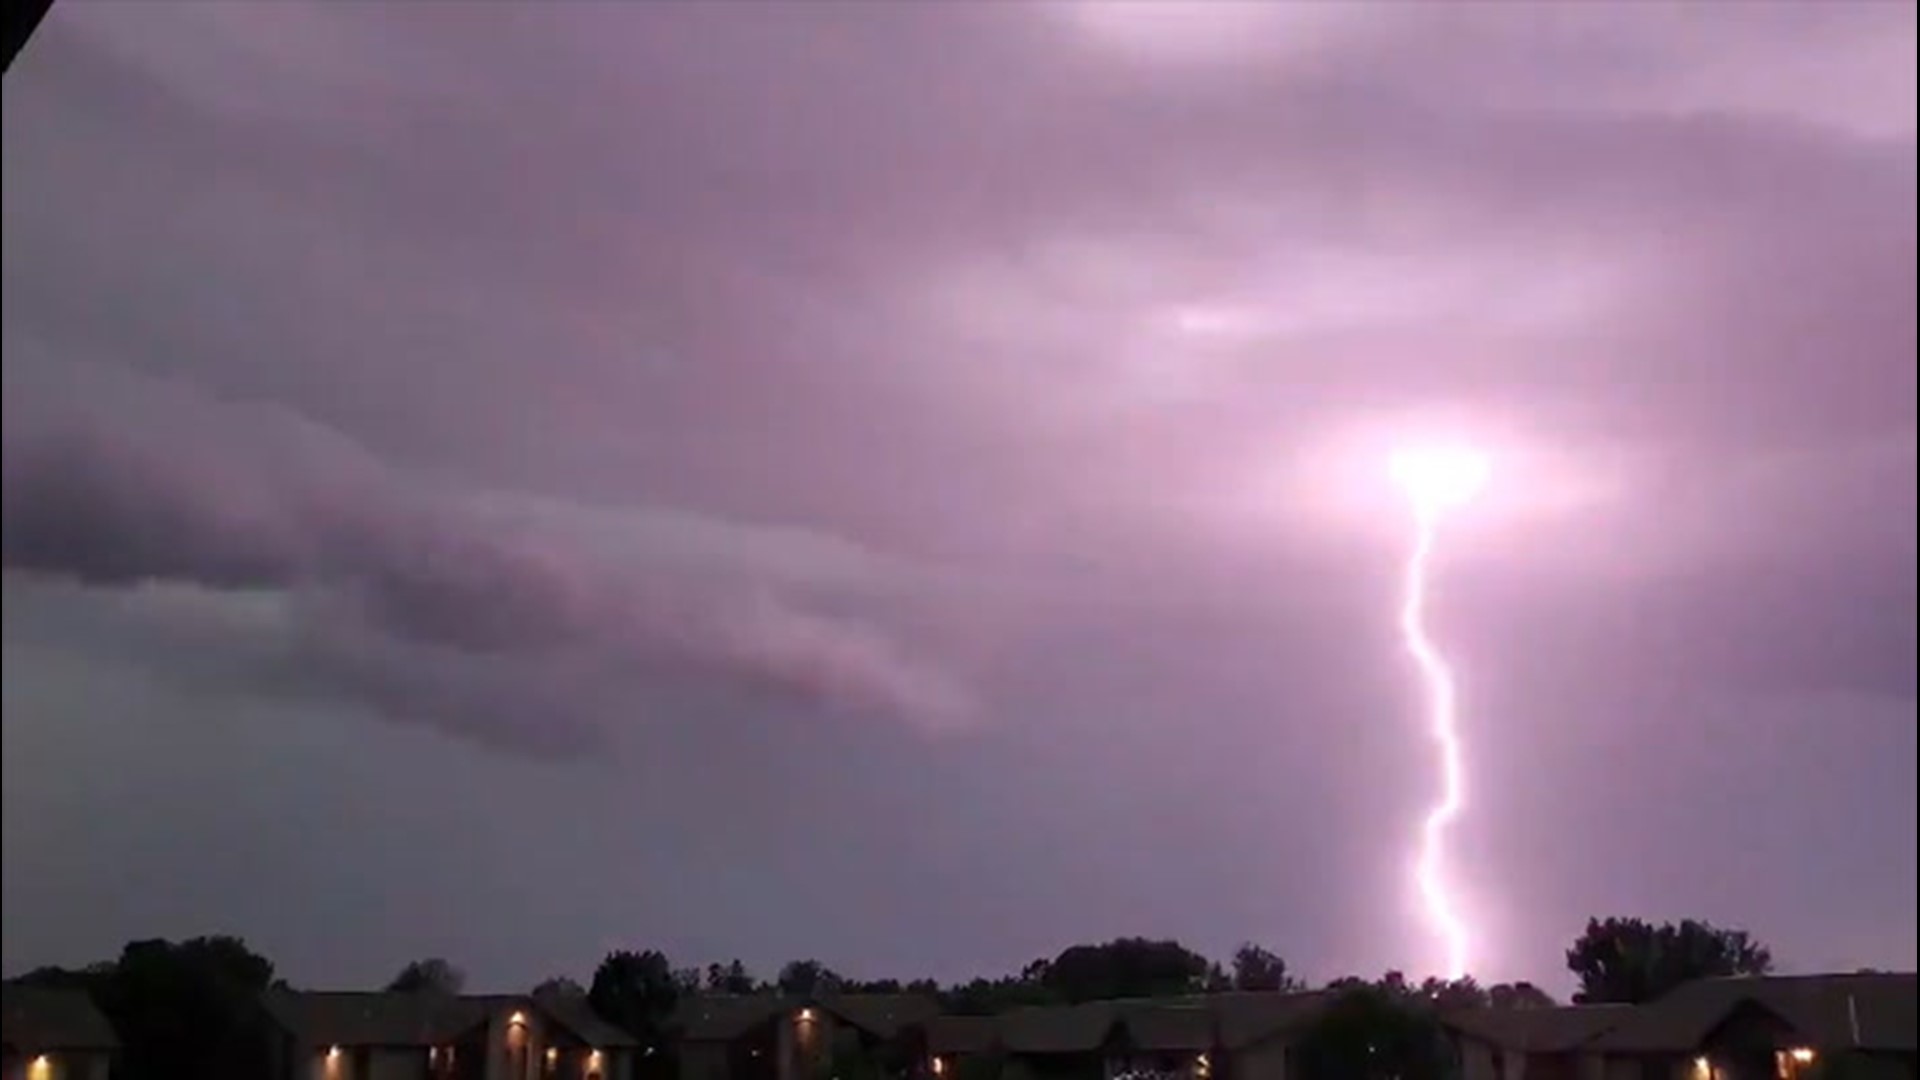 Vivid lightning could be seen during the evening of June 2 as thunderstorms moved through Appleton, Wisconsin.